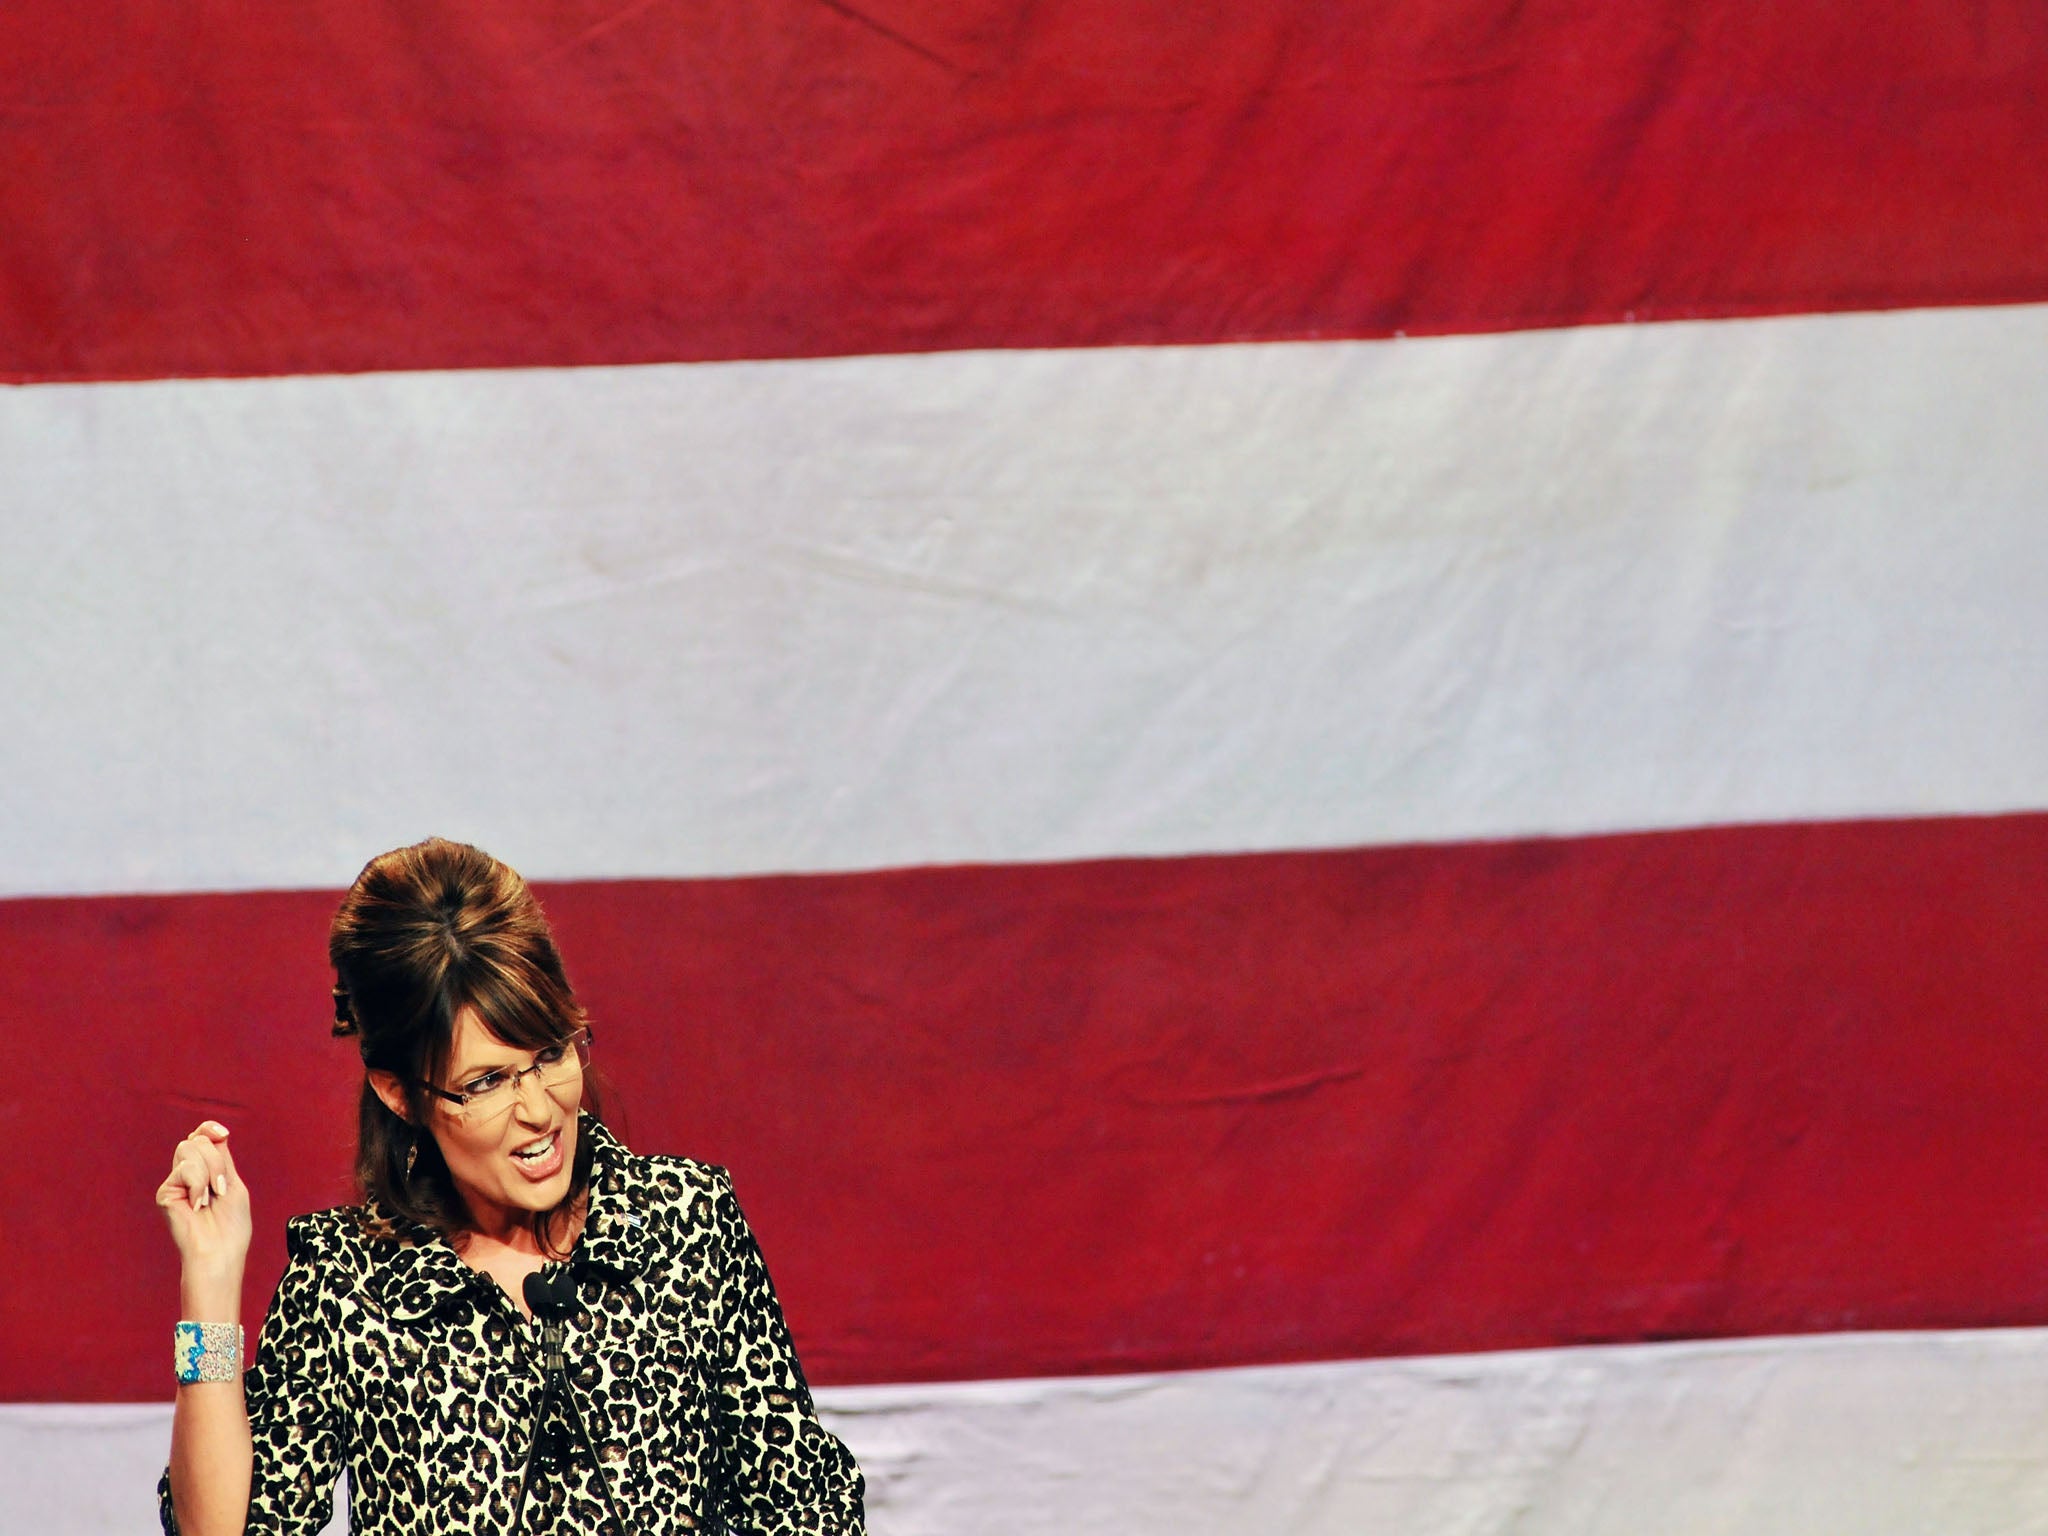 Sarah Palin said she'd like to be Energy Secretary in order to scrap the department